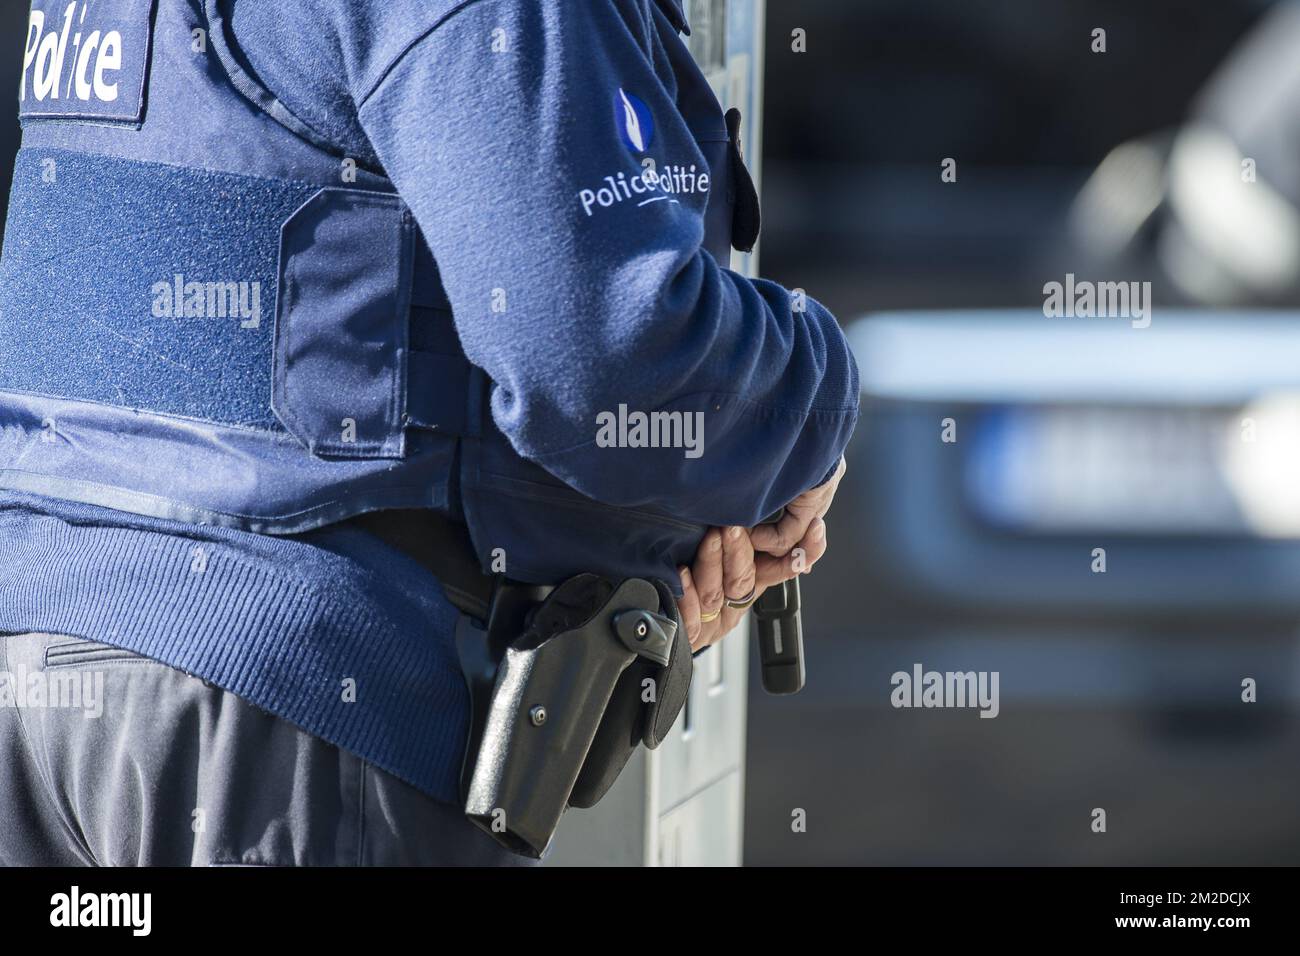 Police operation - Weapon at the fist | Operation et deploiement de police. Armes au poing Stock Photo